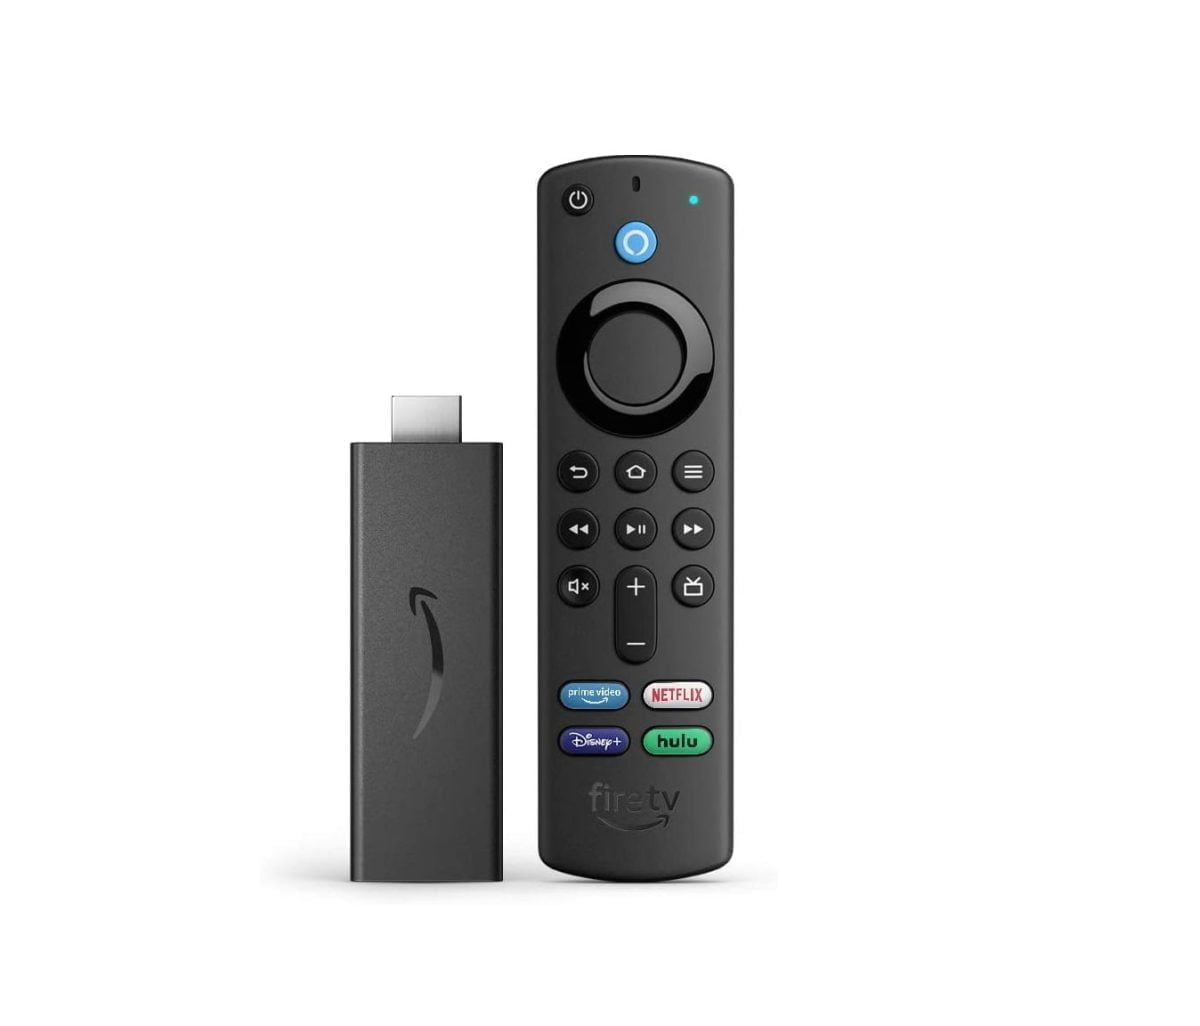 51Kkr5Ugn6L. Ac Sl1000 Amazon &Amp;Lt;H1&Amp;Gt;Fire Tv Stick (3Rd Gen) With Alexa Voice Remote 3Rd Gen (Includes Tv Controls) | Hd Streaming Device | 2021 Release&Amp;Lt;/H1&Amp;Gt; &Amp;Lt;Ul&Amp;Gt; &Amp;Lt;Li&Amp;Gt;&Amp;Lt;Span Class=&Amp;Quot;A-List-Item&Amp;Quot;&Amp;Gt; Latest Generation Of Our Best-Selling Fire Tv Device - 50% More Powerful Than The 2Nd Generation For Fast Streaming In Full Hd. Includes Alexa Voice Remote With Power And Volume Buttons.&Amp;Lt;/Span&Amp;Gt;&Amp;Lt;/Li&Amp;Gt; &Amp;Lt;Li&Amp;Gt;500,000+ Movies And Tv Episodes - With Thousands Included In Your Prime Membership.&Amp;Lt;/Li&Amp;Gt; &Amp;Lt;Li&Amp;Gt;Tens Of Thousands Of Channels, Alexa Skills, And Apps - Including Netflix, Youtube, Prime Video, Disney+, Apple Tv, And Hbo Max. Subscription Fees May Apply.&Amp;Lt;/Li&Amp;Gt; &Amp;Lt;Li&Amp;Gt;Live Tv - Watch Your Favorite Live Tv, News, And Sports With Subscriptions To Sling Tv, Youtube Tv, And Others. Use The Guide Button To See What'S Available And When.&Amp;Lt;/Li&Amp;Gt; &Amp;Lt;Li&Amp;Gt;Free Tv - Access Over 20,000 Free Movies And Tv Shows From Apps Like Imdb Tv, Tubi, Pluto Tv, And More.&Amp;Lt;/Li&Amp;Gt; &Amp;Lt;Li&Amp;Gt;Listen To Music - Stream On Amazon Music, Spotify, Pandora, And Others. Subscription Fees May Apply.&Amp;Lt;/Li&Amp;Gt; &Amp;Lt;Li&Amp;Gt;Less Clutter, More Control - Alexa Voice Remote Lets You Use Your Voice To Search And Launch Shows Across Apps. All-New Preset Buttons Get You To Favorite Apps Quickly. Plus, Control Power And Volume On Your Tv And Soundbar With A Single Remote.&Amp;Lt;/Li&Amp;Gt; &Amp;Lt;/Ul&Amp;Gt; &Amp;Lt;H2&Amp;Gt;Included In The Box&Amp;Lt;/H2&Amp;Gt; Fire Tv Stick (3Rd Gen), &Amp;Lt;A Href=&Amp;Quot;Https://Www.amazon.com/Dp/B08D6Wjyd9&Amp;Quot;&Amp;Gt;Alexa Voice Remote (3Rd Gen)&Amp;Lt;/A&Amp;Gt;, Usb Cable And Power Adapter, Hdmi Extender, 2 Aaa Batteries, &Amp;Lt;A Href=&Amp;Quot;Https://Customerdocumentation.s3-Us-West-2.Amazonaws.com/Amazon+Fire+Tv+User+Guides/Fire+Tv+Stick+Device+Documentation/22-002693-01_Firetvstick_Gen3_Online_Qsg_Us.pdf&Amp;Quot;&Amp;Gt;Quick Start Guide&Amp;Lt;/A&Amp;Gt; &Amp;Lt;Div Class=&Amp;Quot;A-Row A-Expander-Container A-Expander-Inline-Container&Amp;Quot;&Amp;Gt; &Amp;Lt;Div Class=&Amp;Quot;A-Expander-Content A-Expander-Extend-Content A-Expander-Content-Expanded&Amp;Quot;&Amp;Gt;&Amp;Lt;/Div&Amp;Gt; &Amp;Lt;/Div&Amp;Gt; Amazon Fire Tv Stick Amazon Fire Tv Stick (3Rd Gen) With Alexa Voice Remote 3Rd Gen (Includes Tv Controls) | Hd Streaming Device | 2021 Release